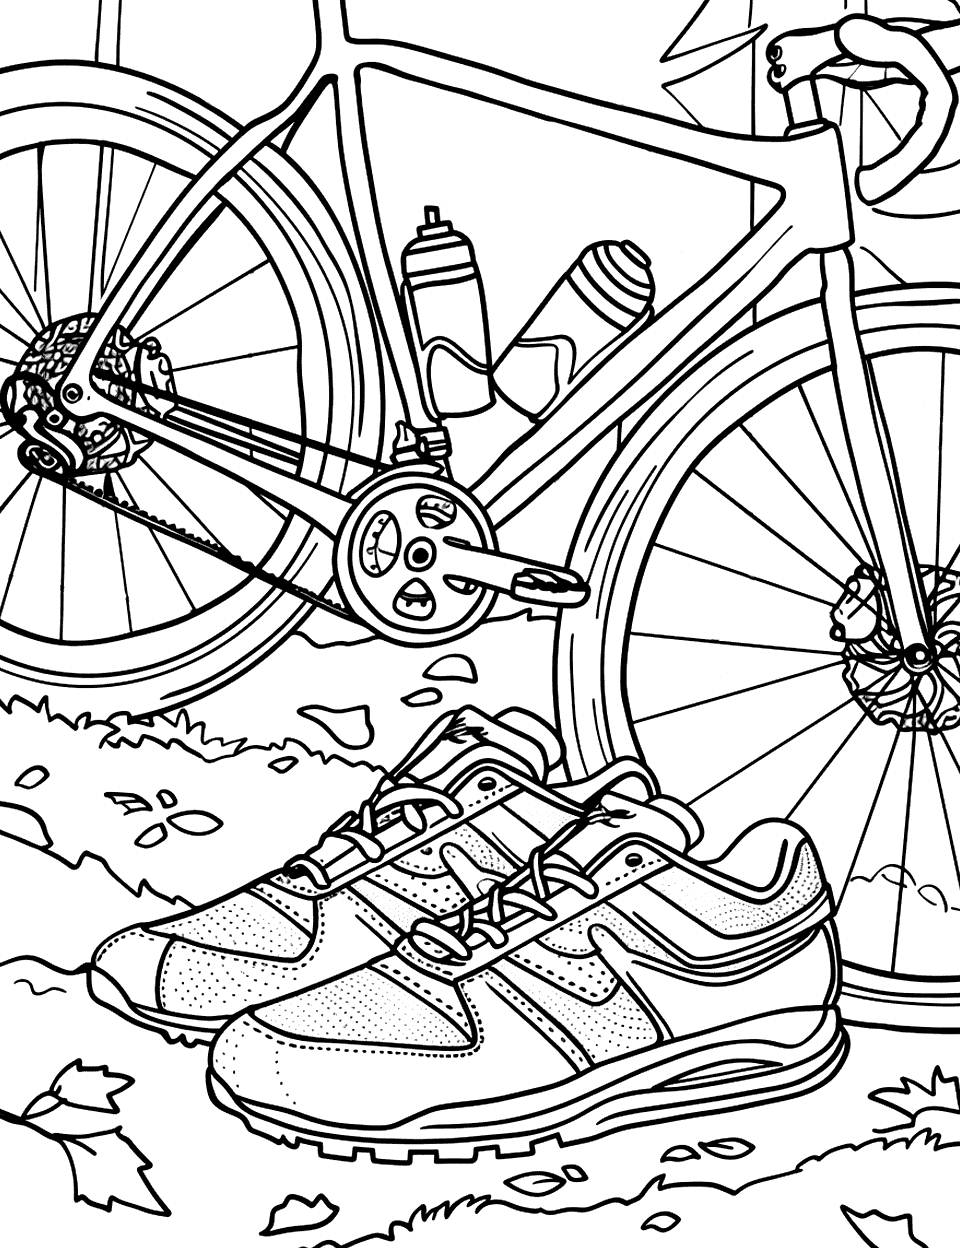 Cycling Shoes on the Trail Shoe Coloring Page - Cycling shoes with a bicycle and a water bottle in a forest trail setting.